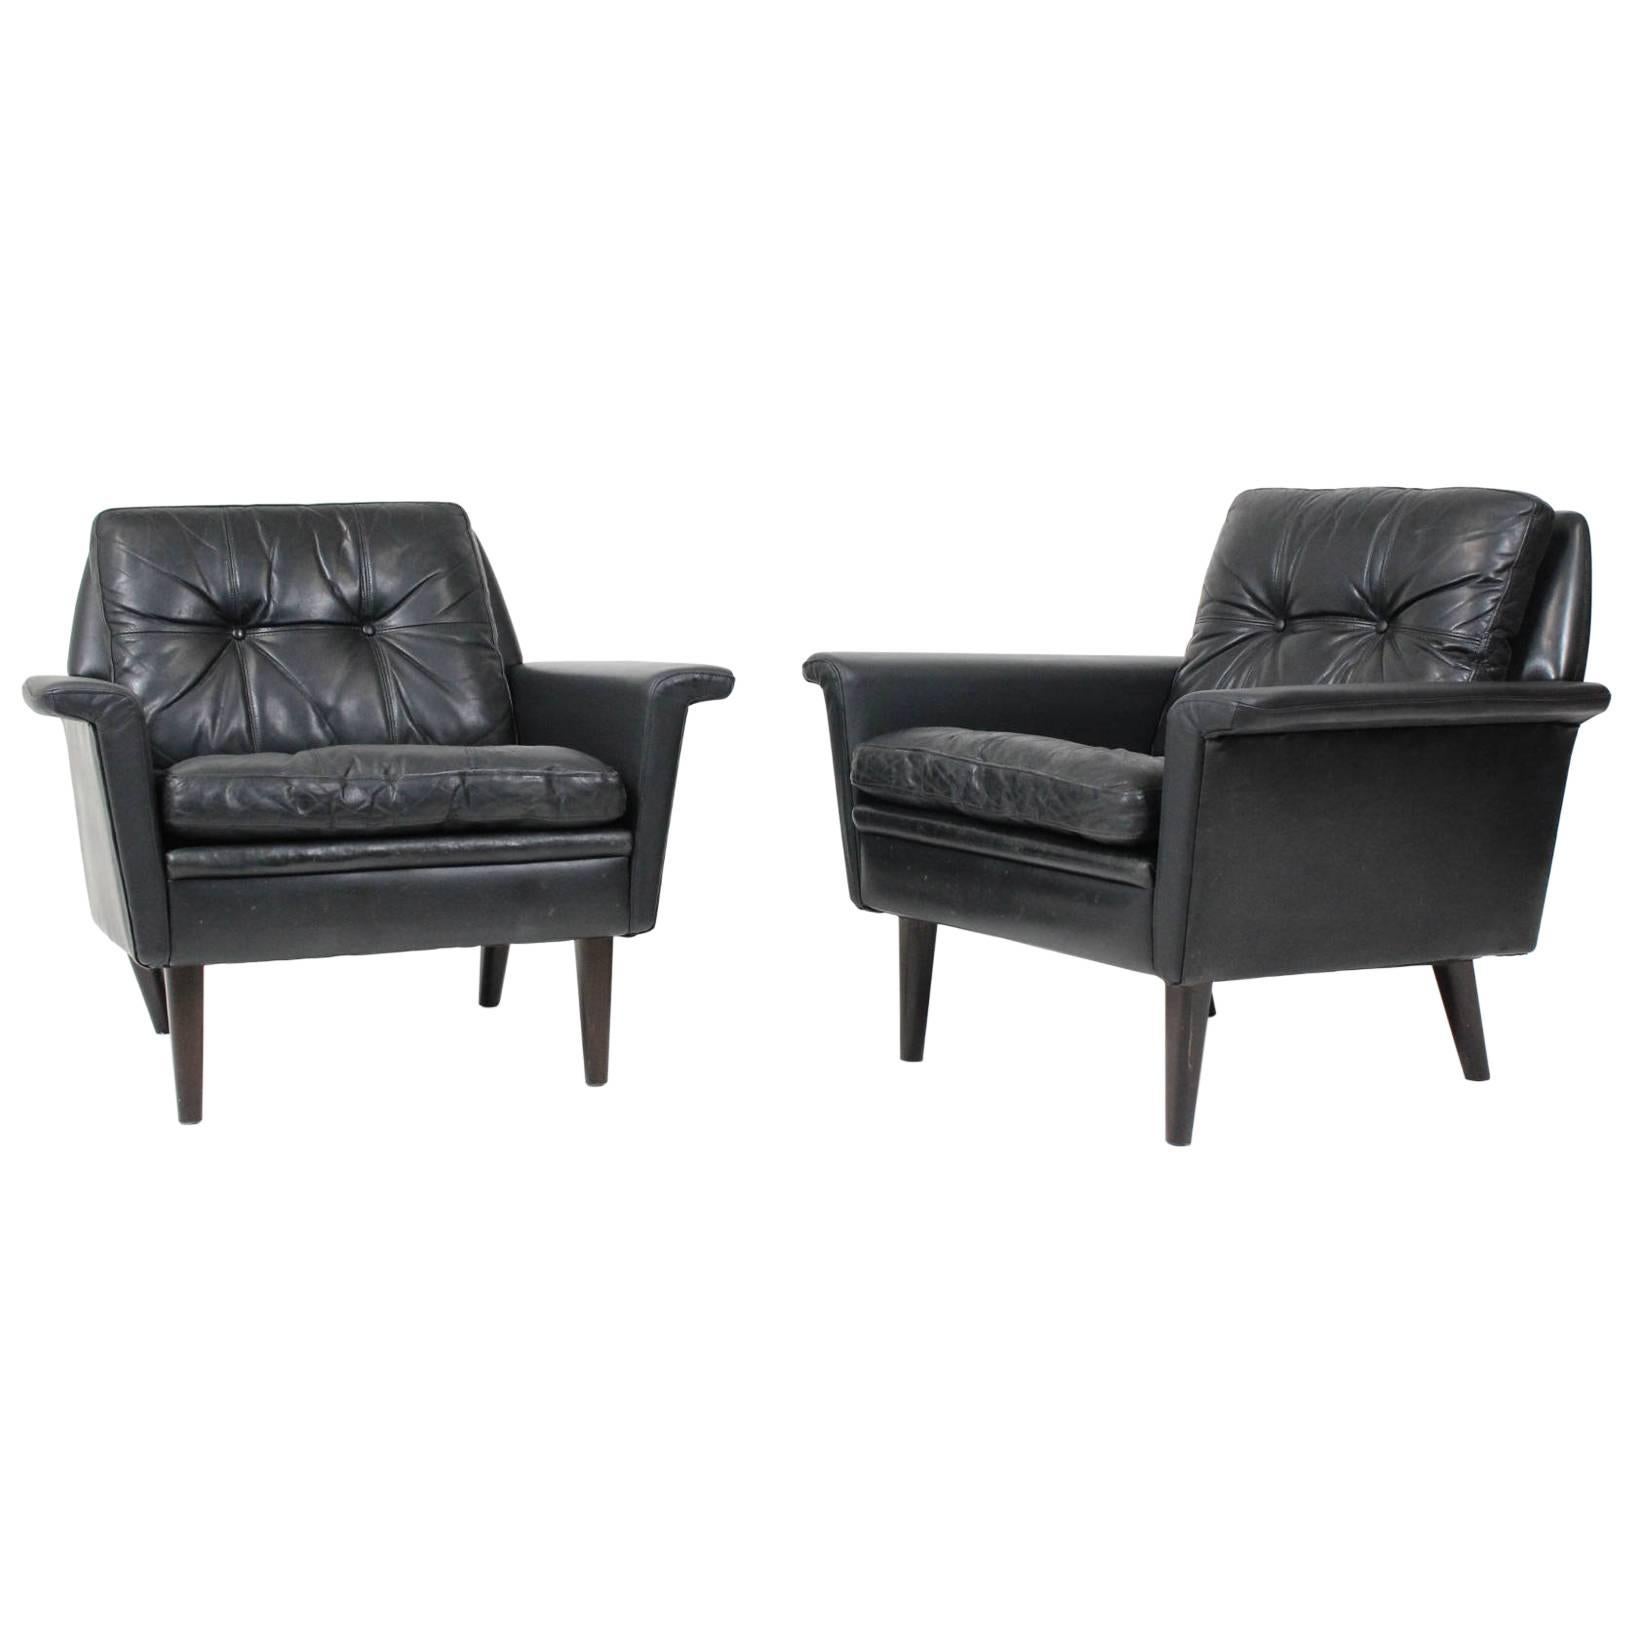 Pair of Hans Olsen Lounge Chairs in Black Patinated Leather